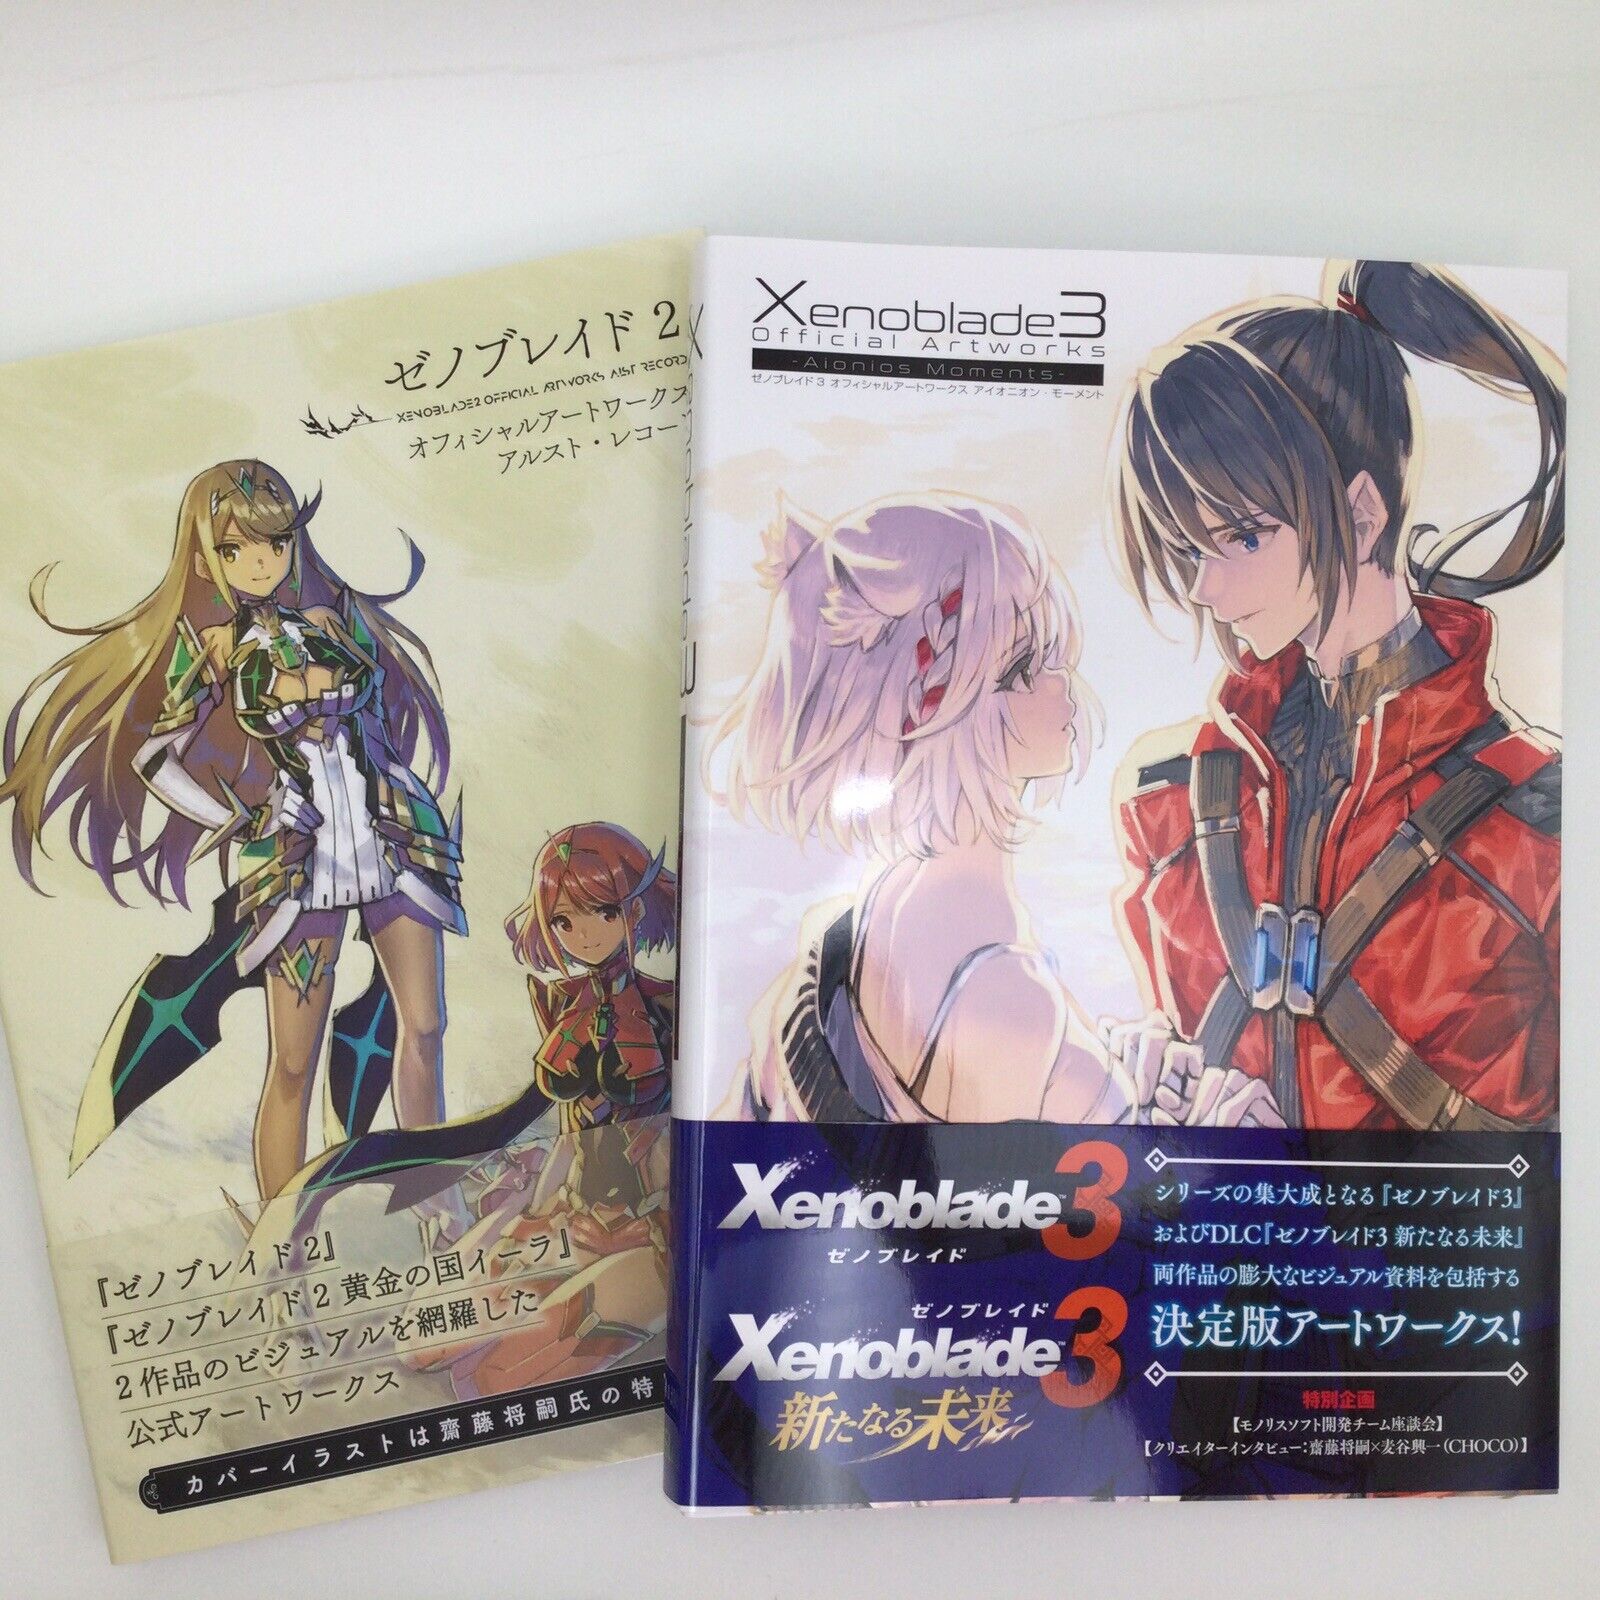 Xenoblade 2 & 3 OFFICIAL ART WORKS Aionions Moments Illustration Book Set